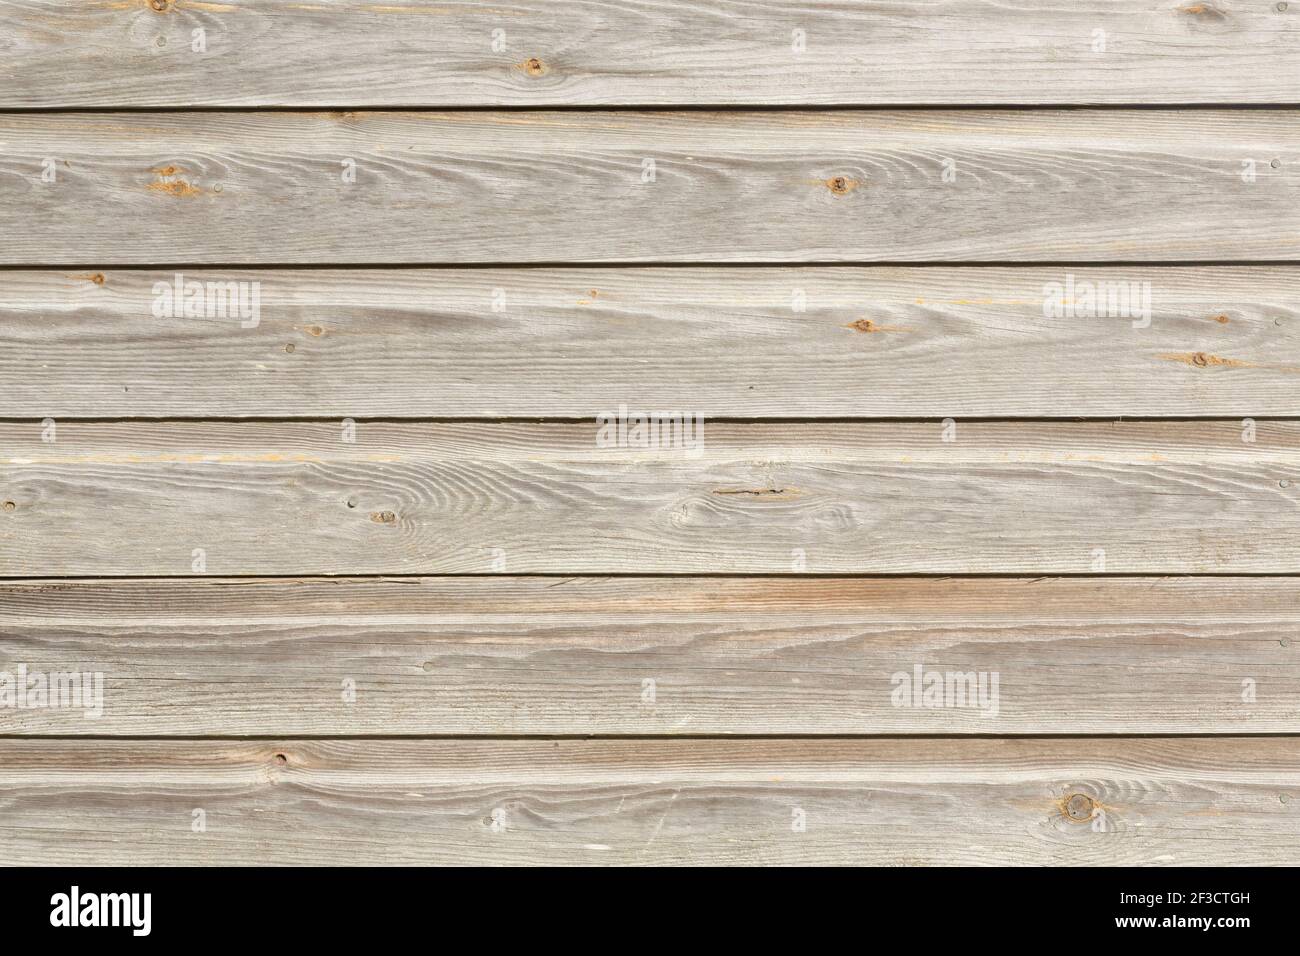 Clapboard, wood siding, timber cladding on an old building exterior, UK. Faded, weathered oak Stock Photo